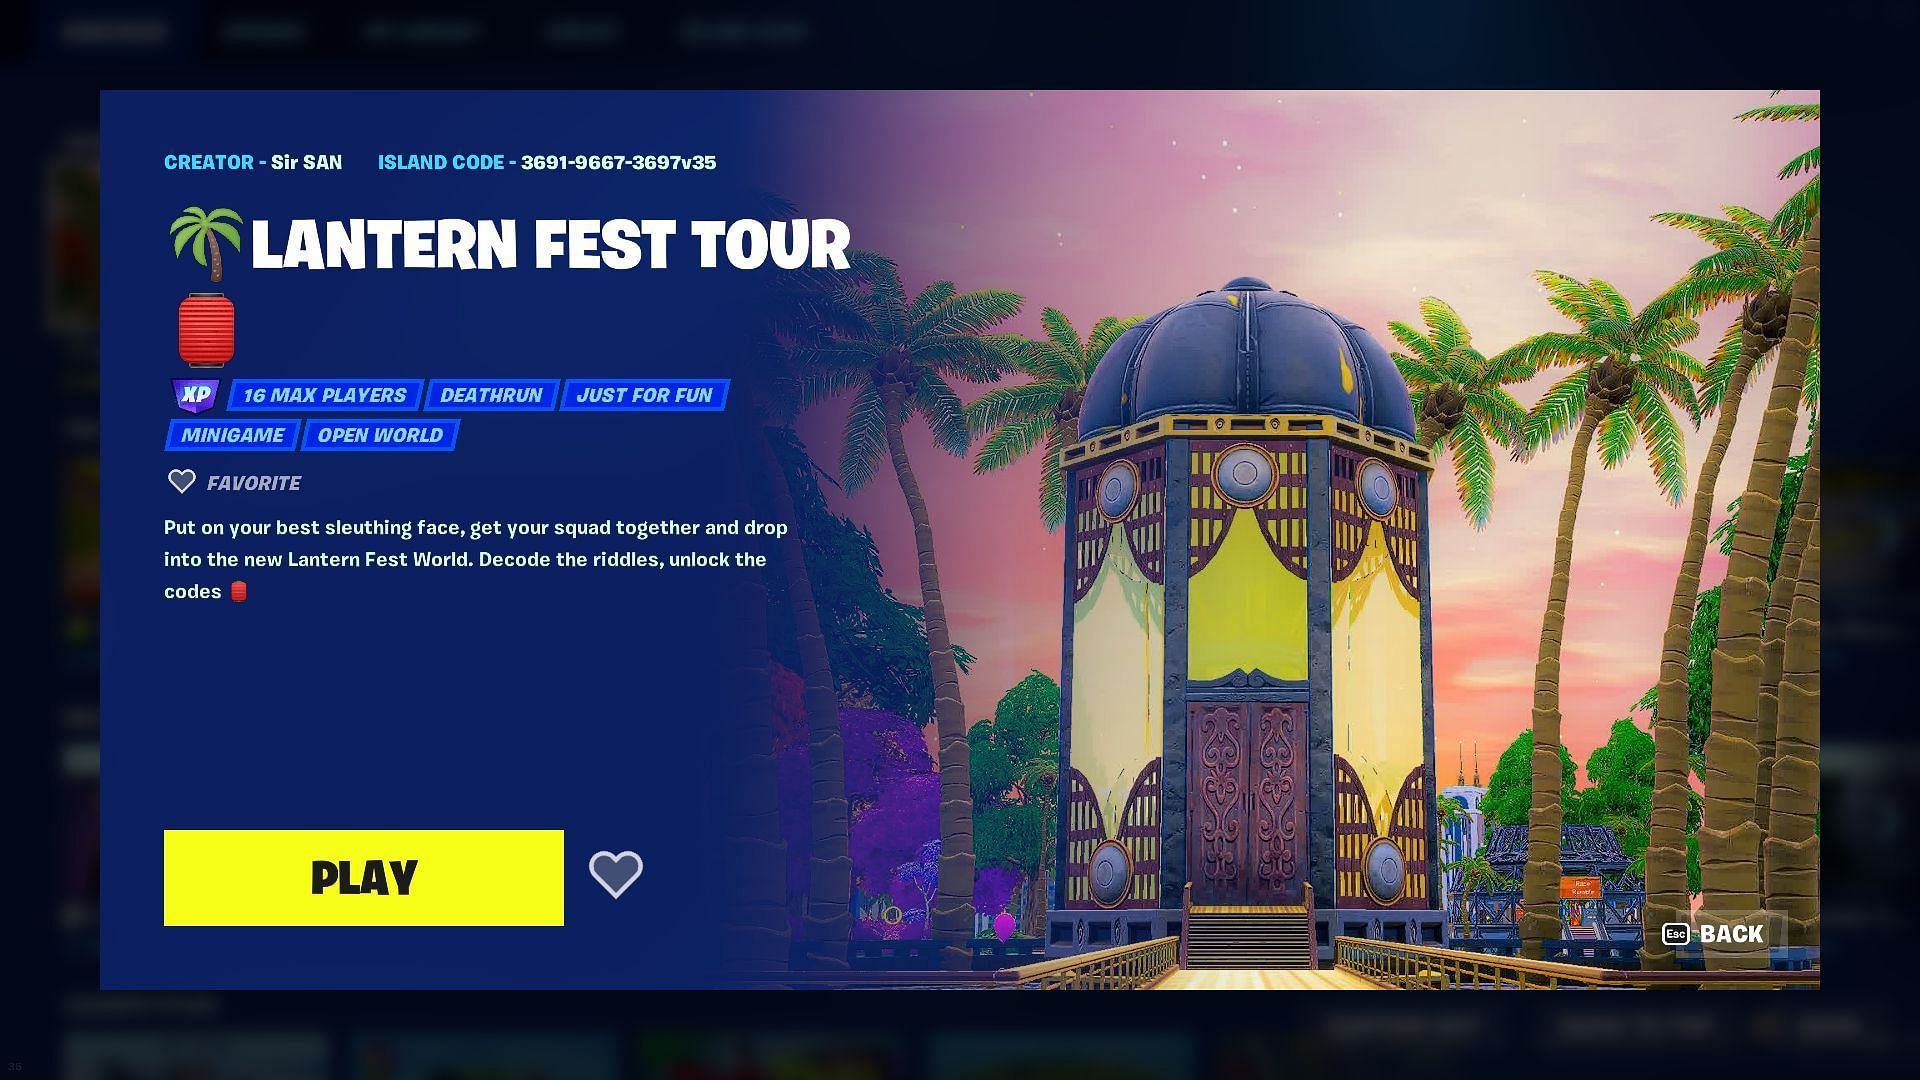 The Lantern Fest Tour Creative Map is beautiful in every way (Image via Epic Games)